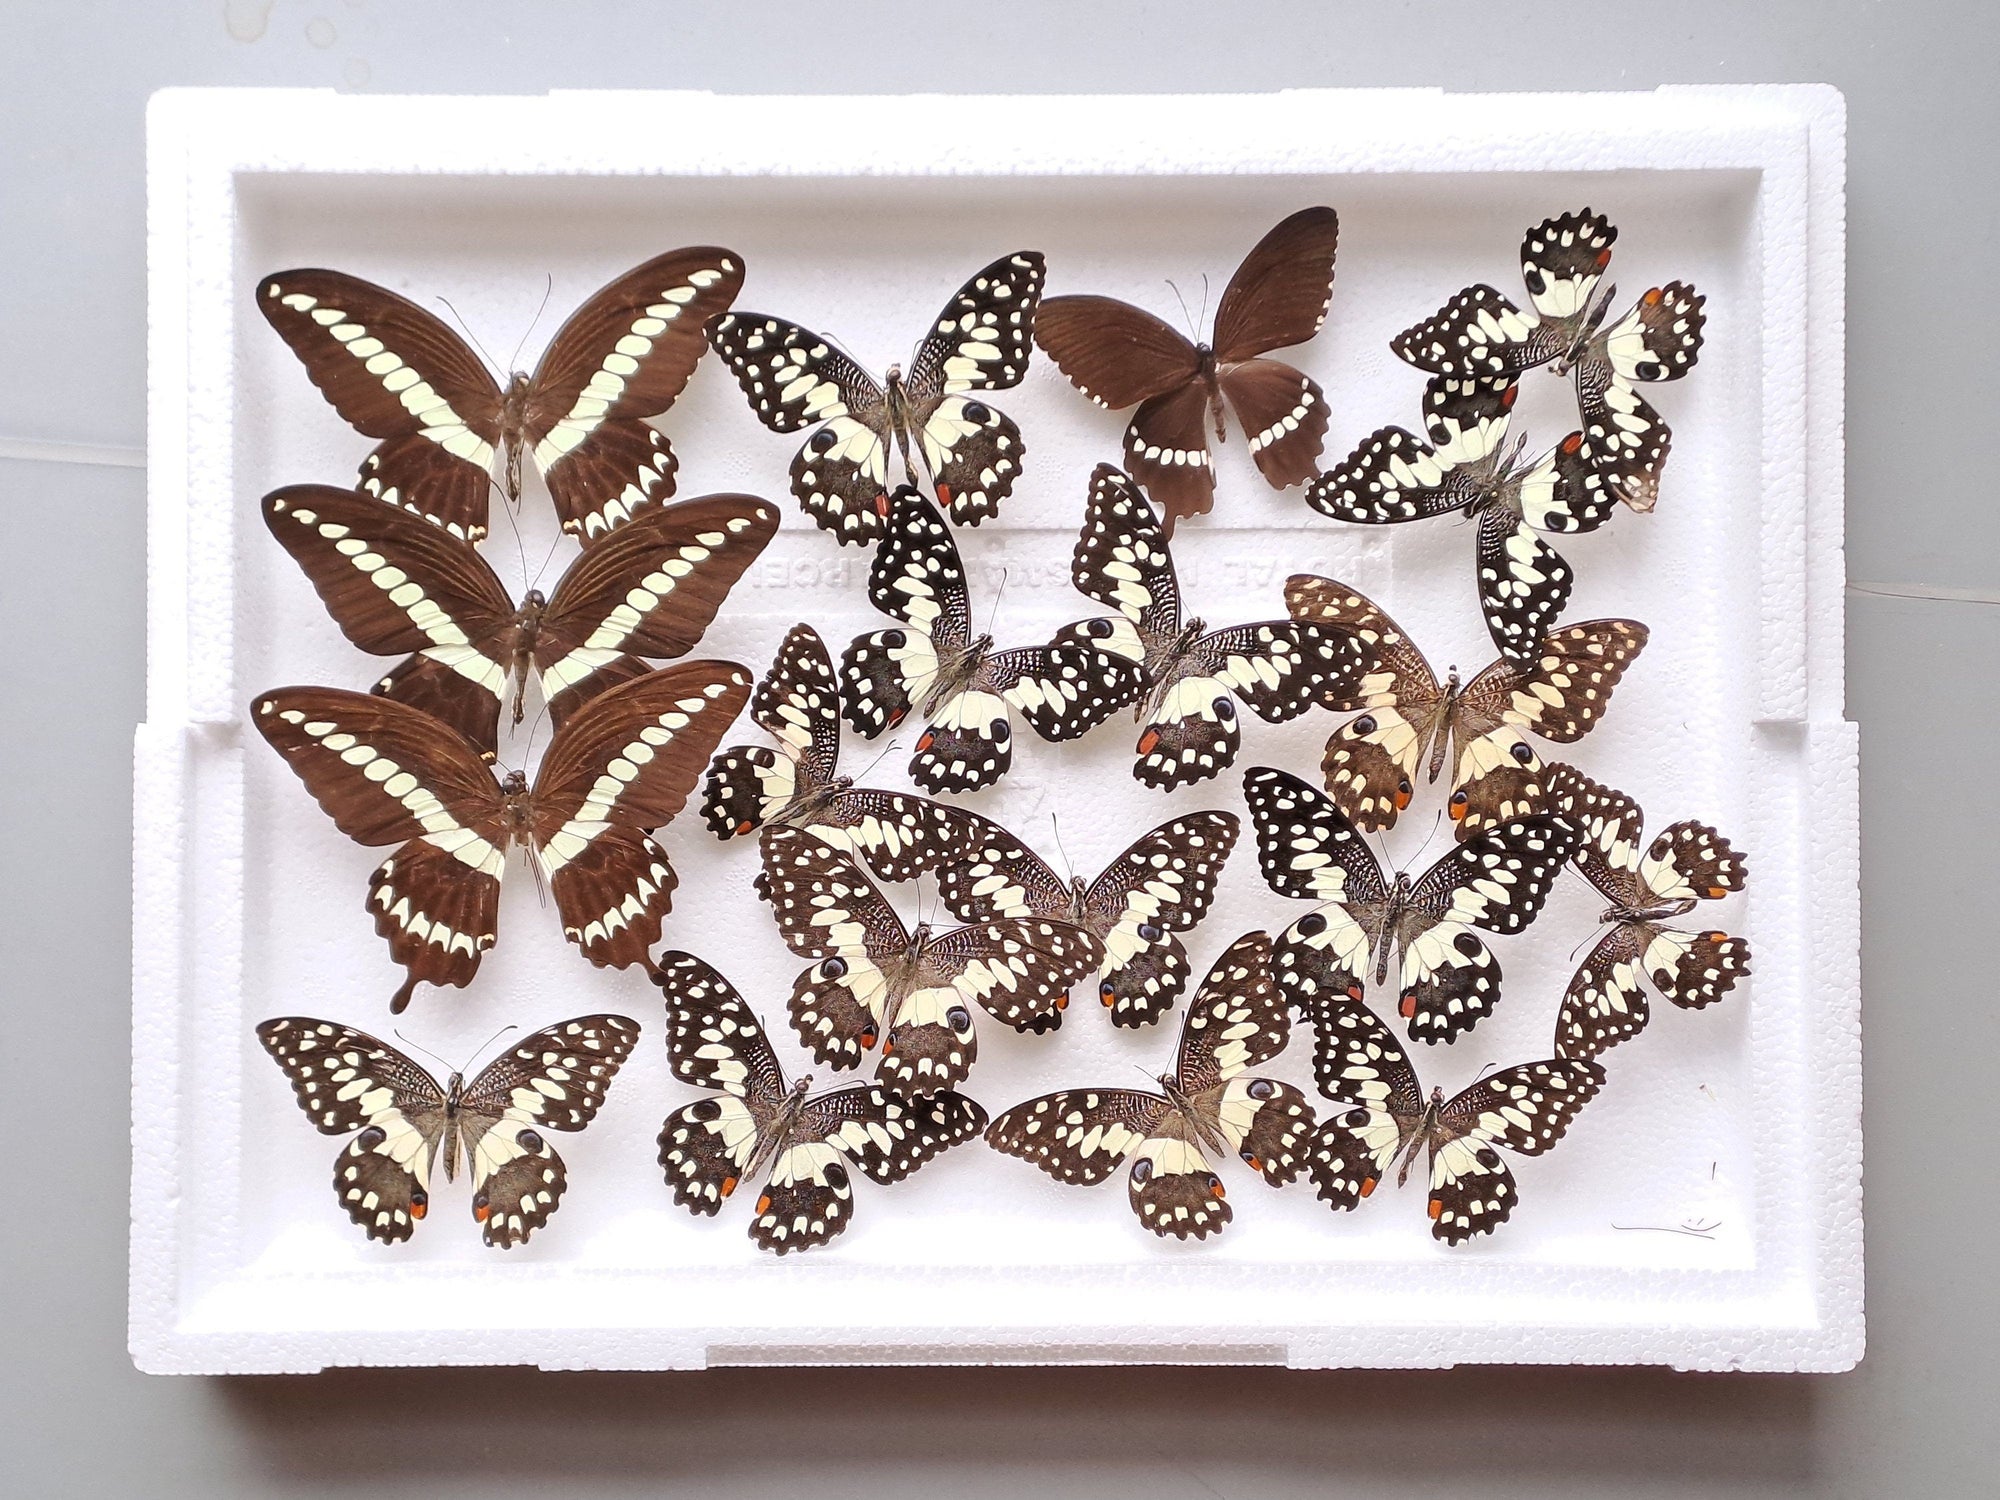 DAMAGED BUTTERFLIES as seen in photo. Good for art and craft projects (BOX No. 7)